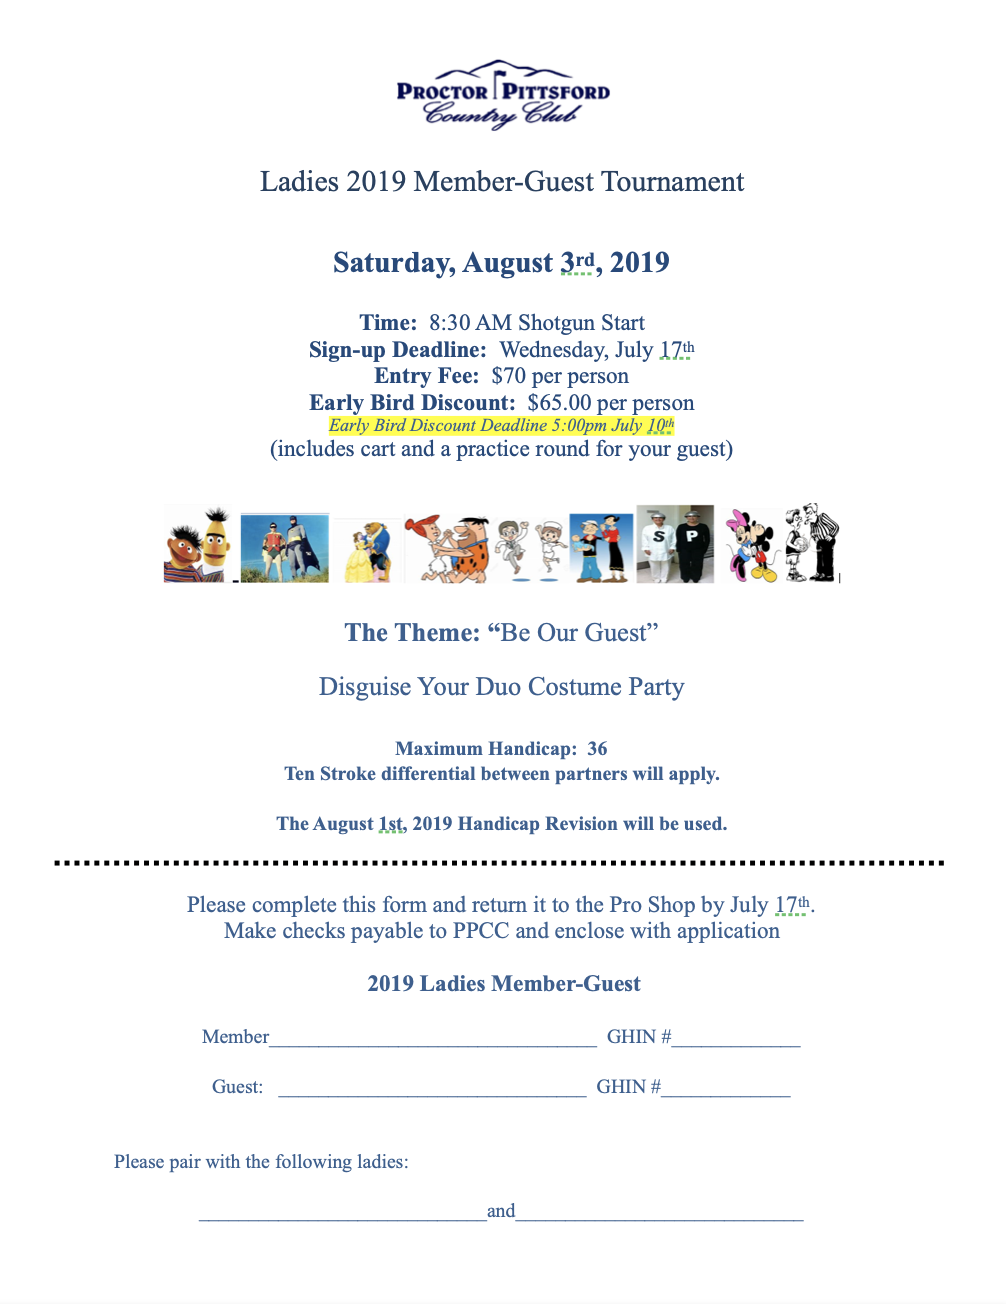 2019-Ladies Member-Guest Tournament-Applications Now Available